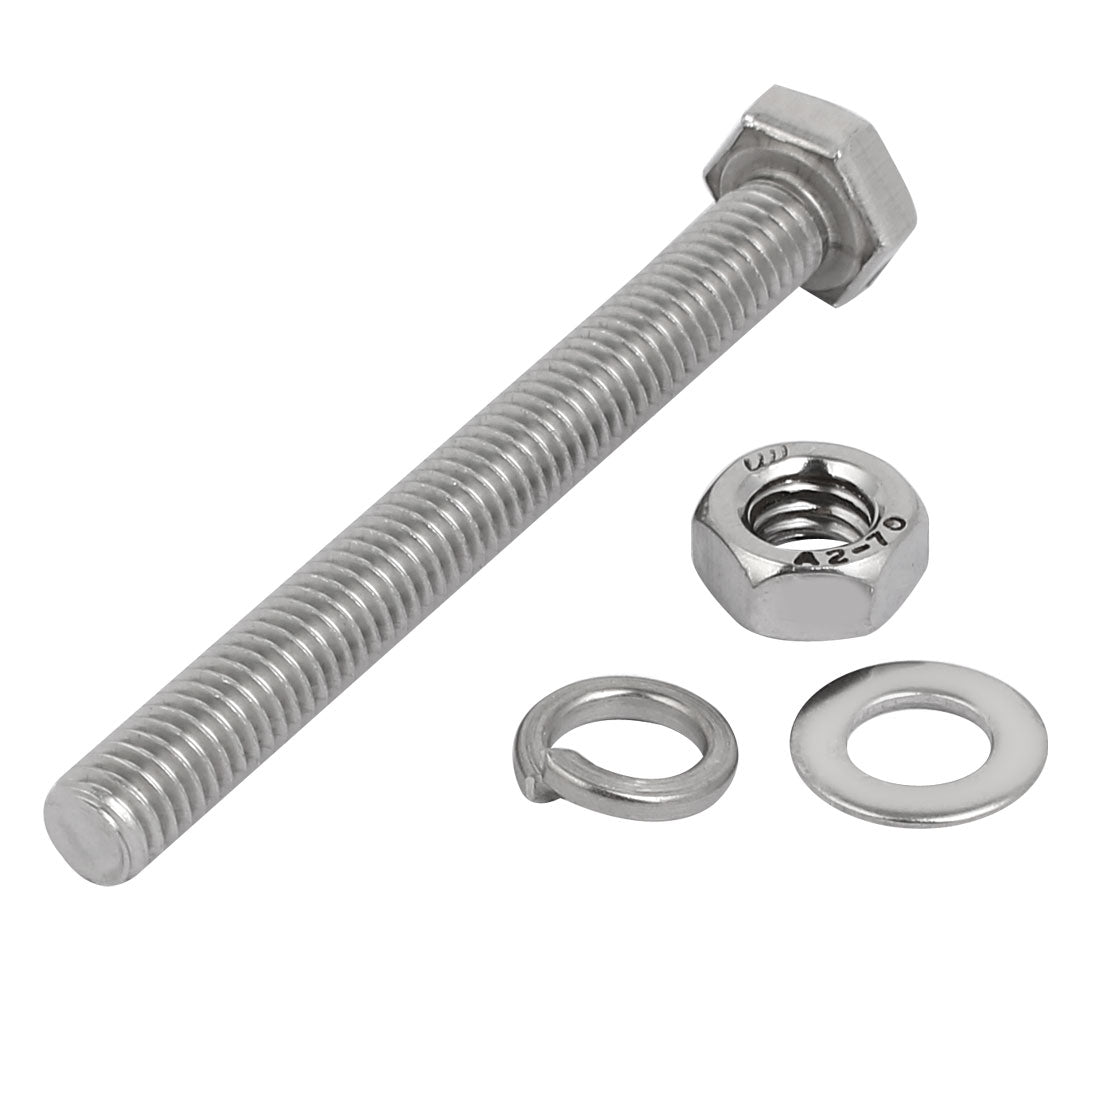 uxcell Uxcell 5pcs 304 Stainless Steel M6x60mm Hex Bolts w Nuts and Washers Assortment Kit